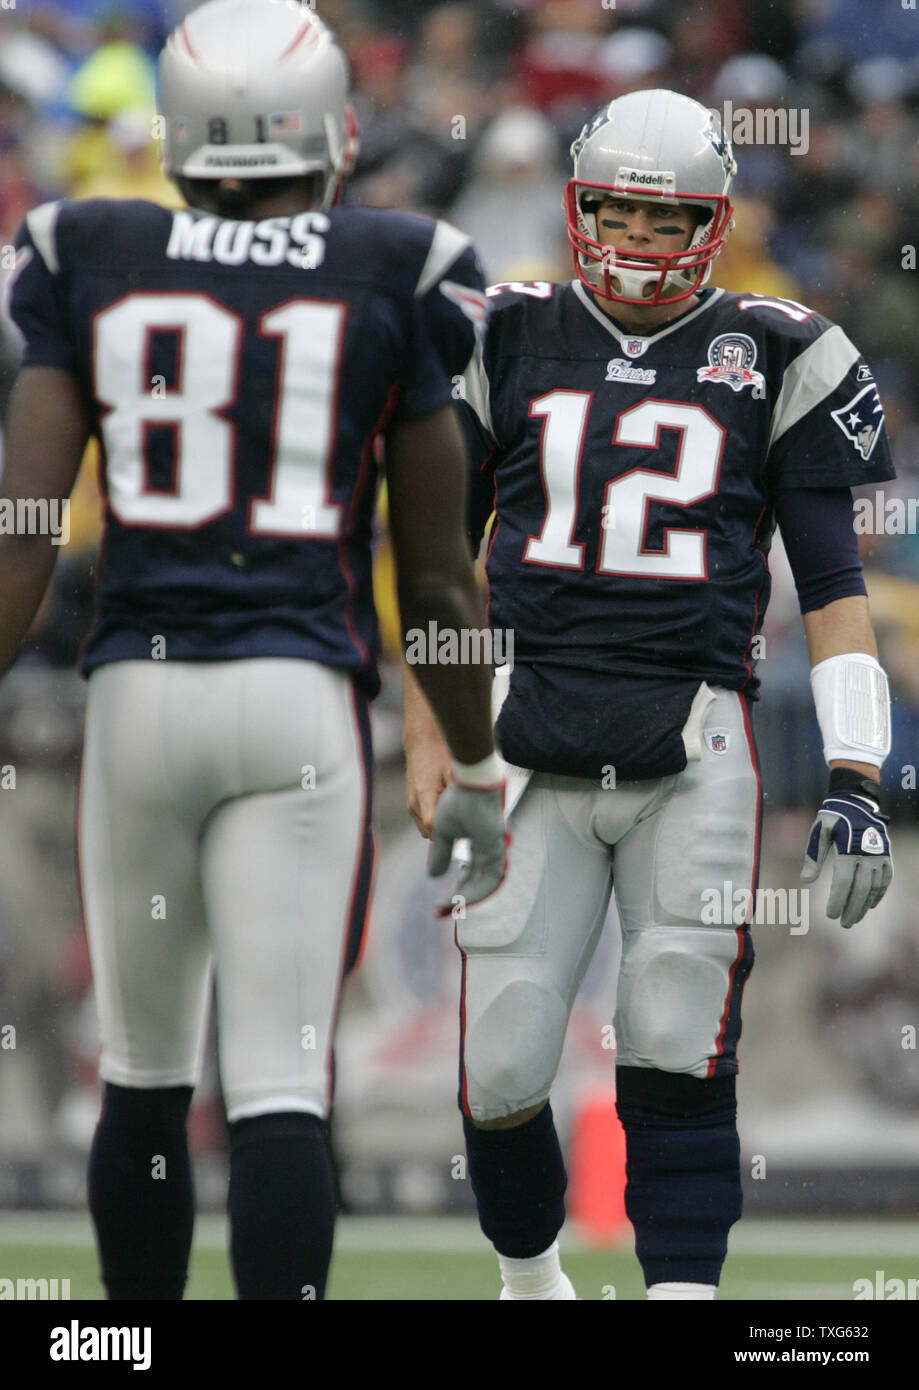 New England Patriots QB Tom Brady (12) chats with wide receiver Randy Moss (81) during the game against the Atlanta Falcons at Gillette Stadium in Foxboro, Massachusetts on September 27, 2009.  The Patriots defeated the Falcons 26-10. UPI/Matthew Healey Stock Photo